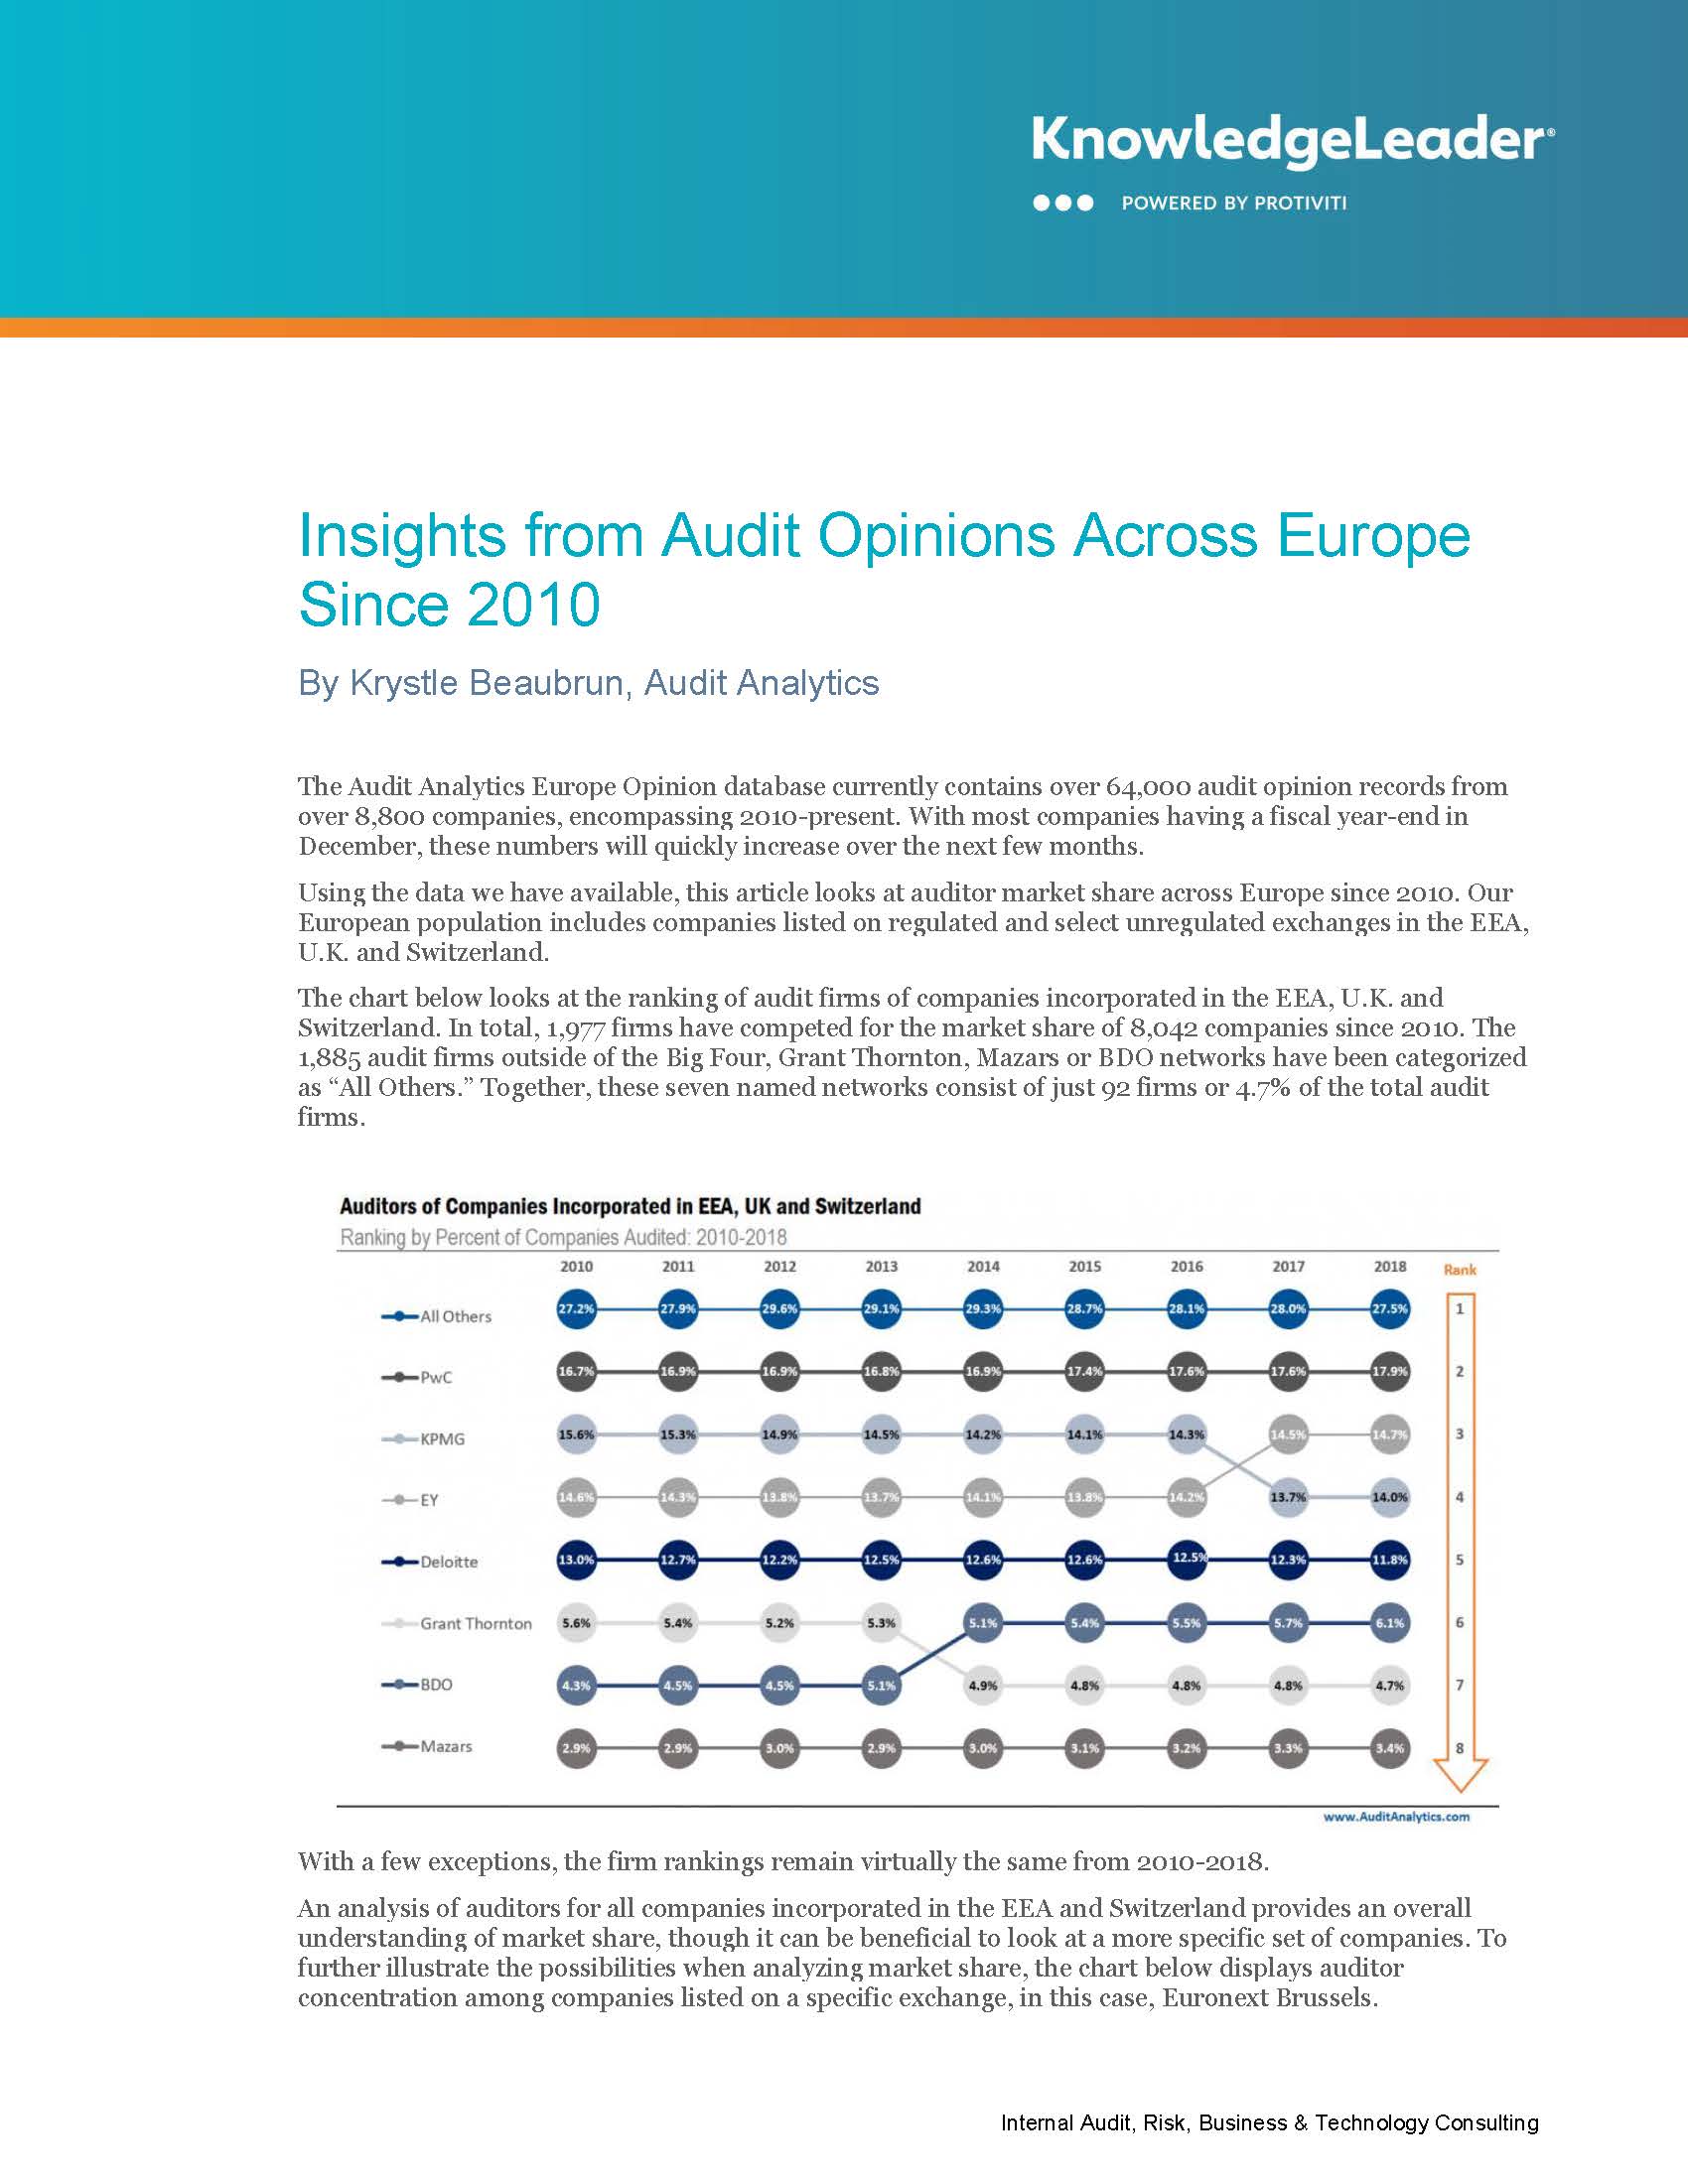 Screenshot of the first page of Insights from Audit Opinions Across Europe Since 2010